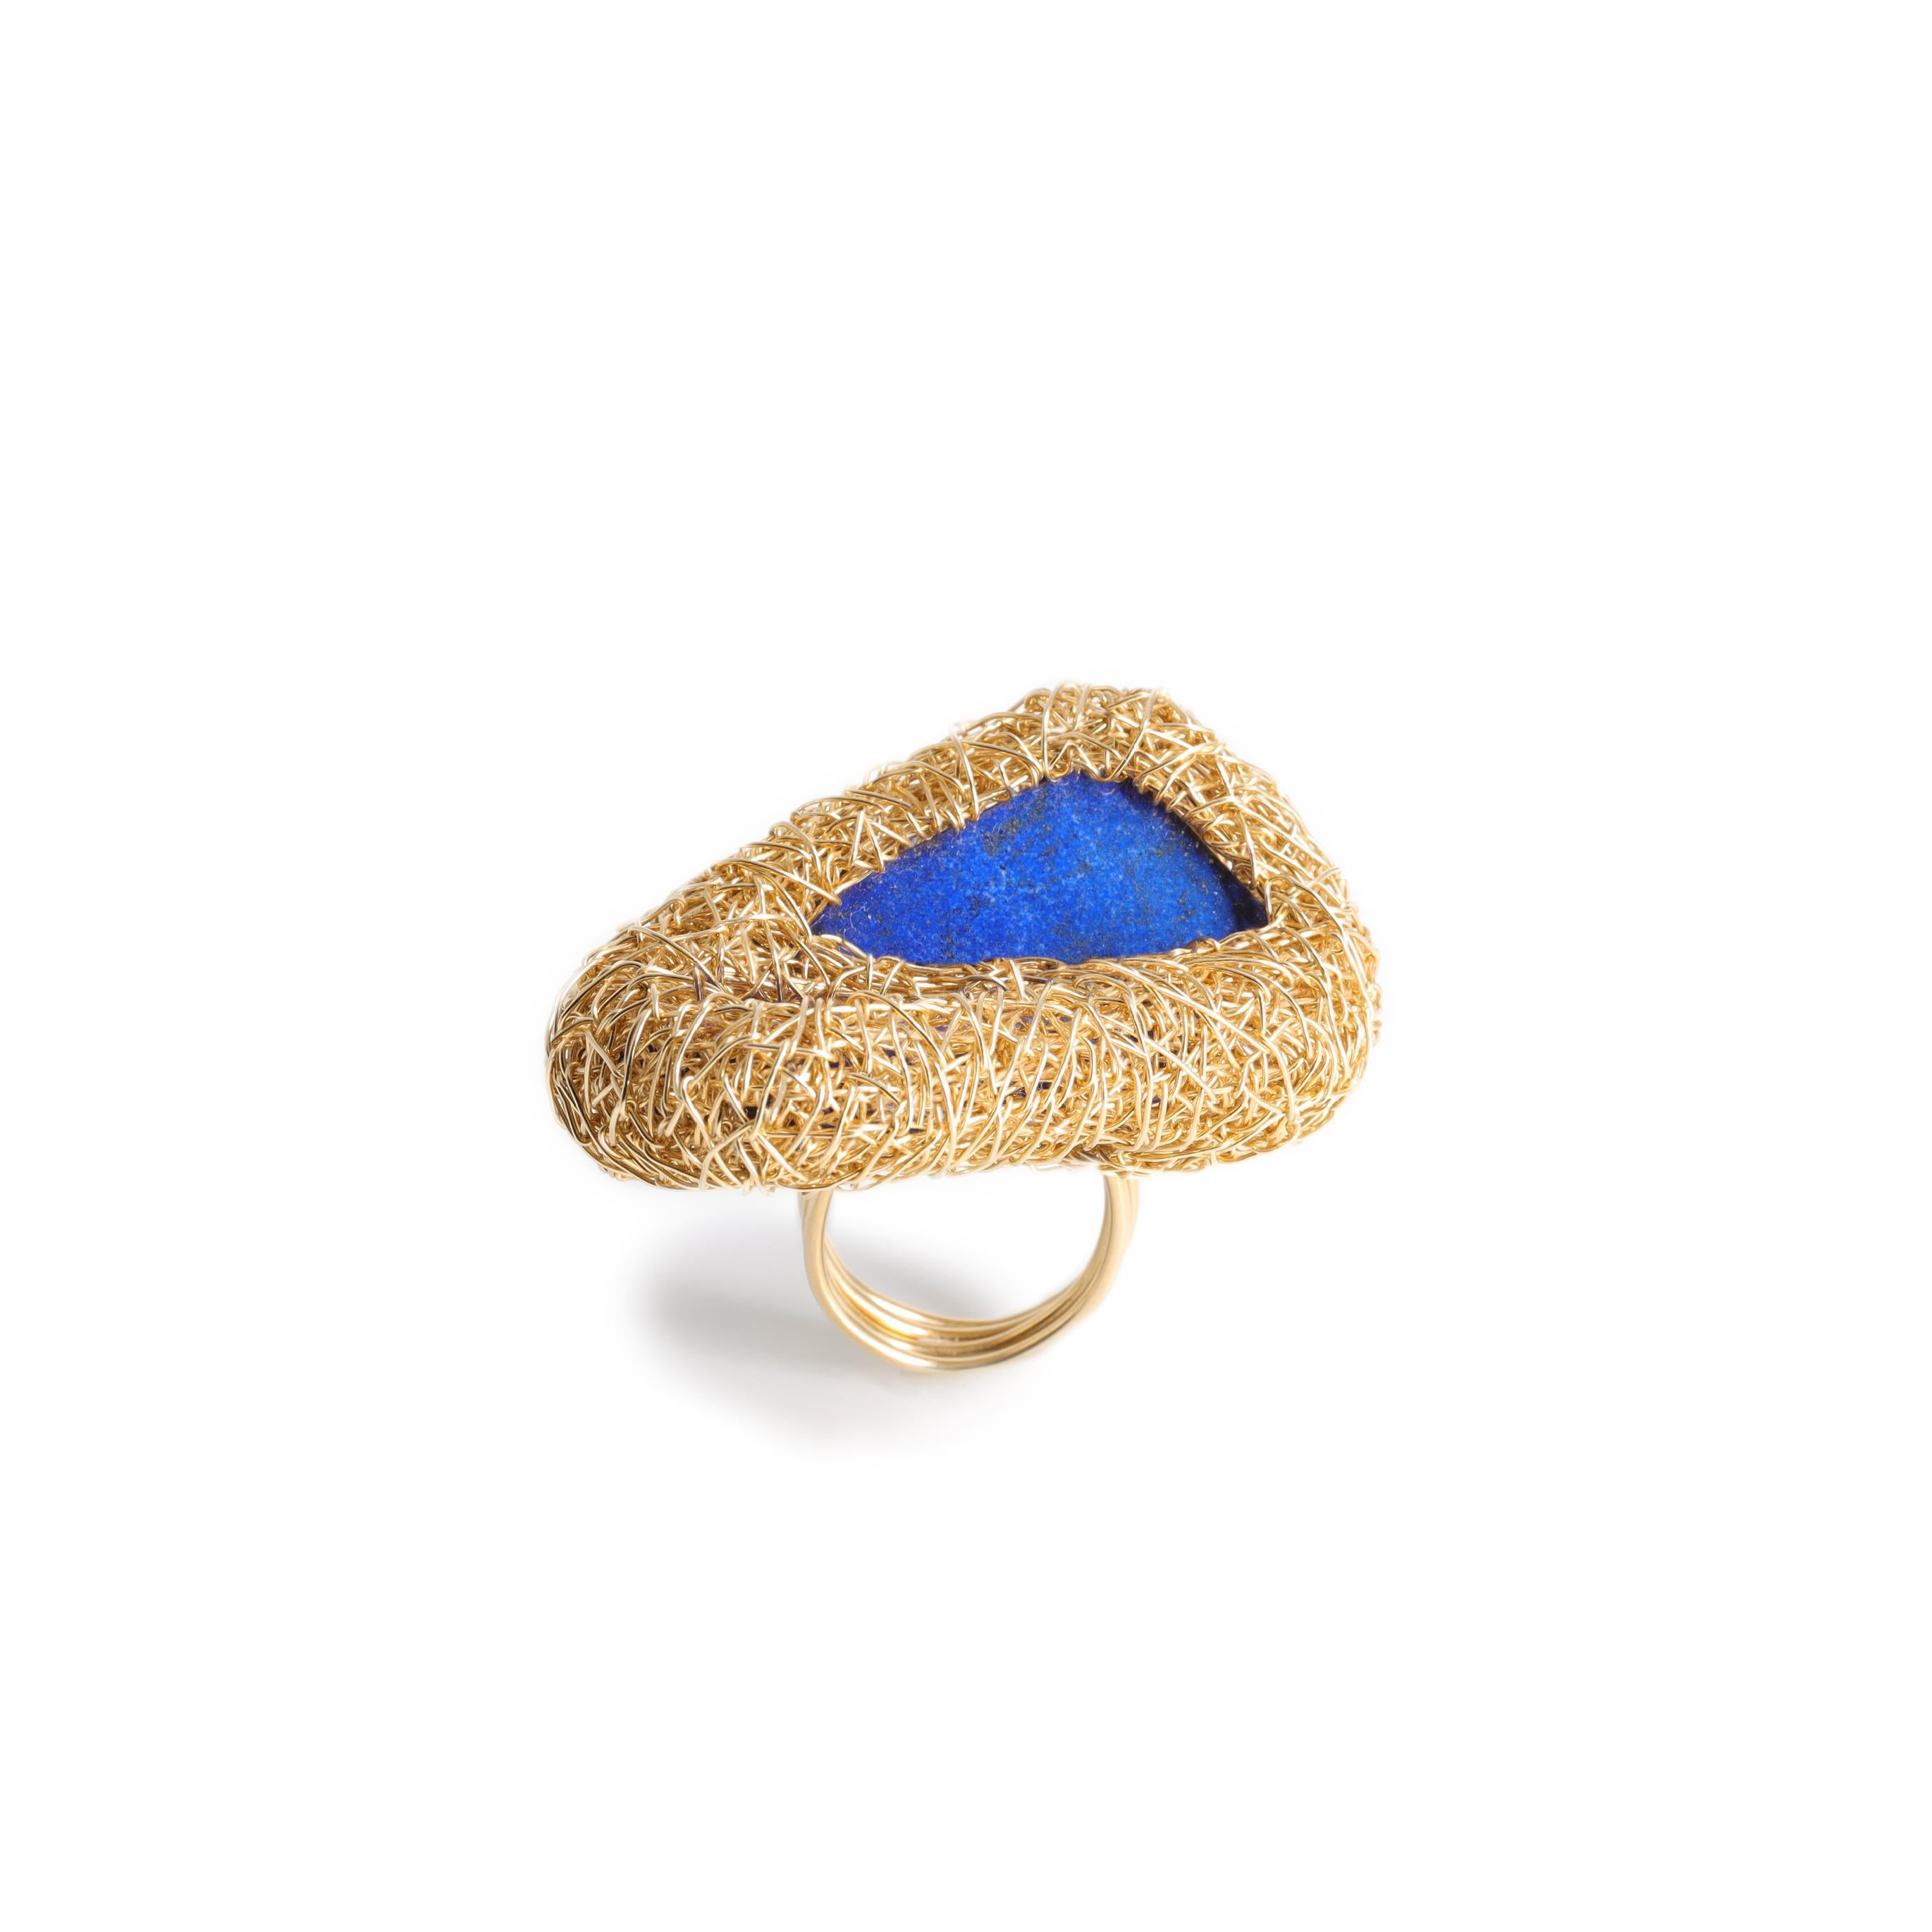 Lapis Lazuli 14 Kt Yellow Gold F. Cocktail Stone Statement Ring by the Artist 2